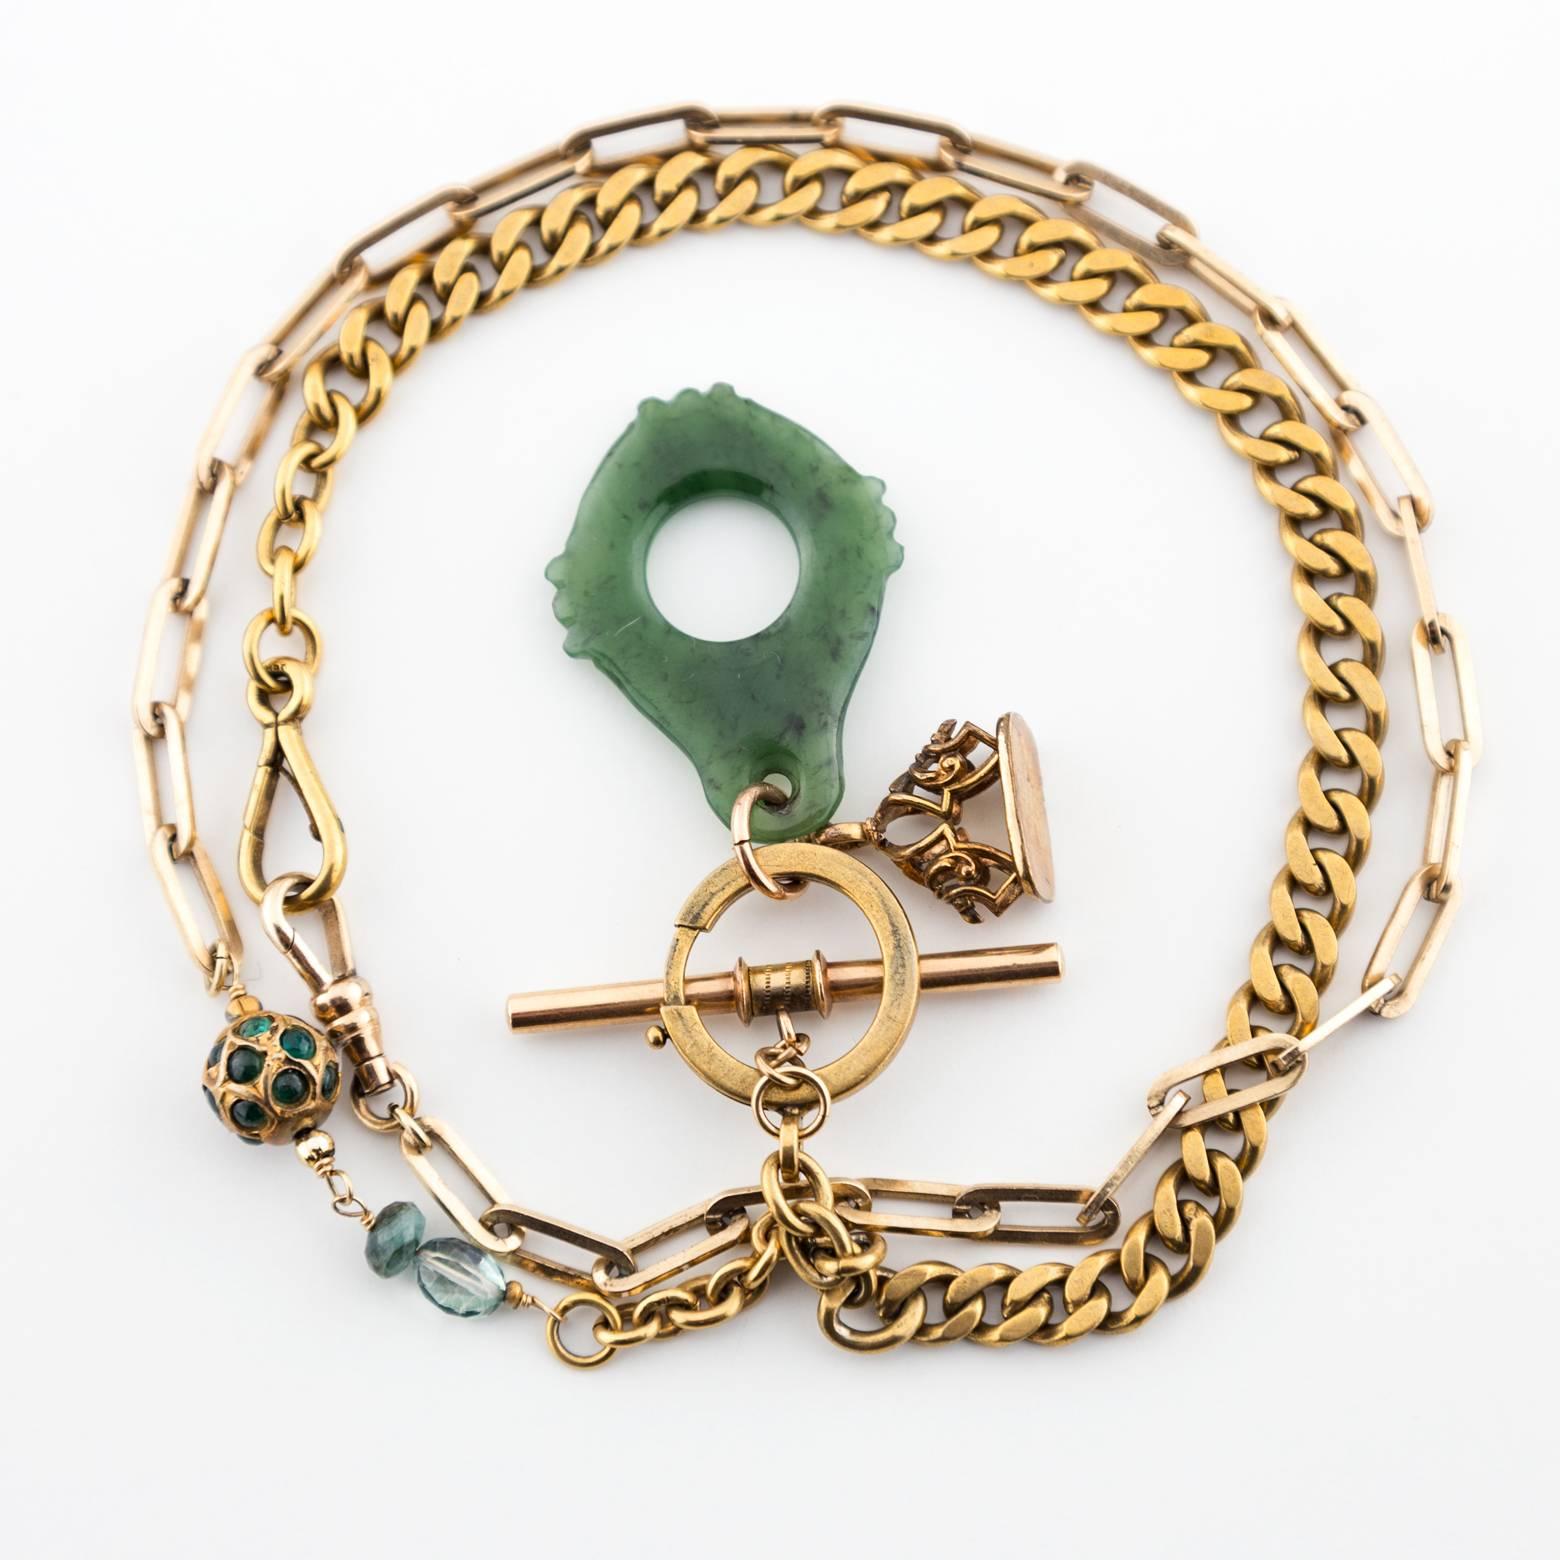 This intricate and detailed chain necklace is full of surprises! Dark Green Jade pendant and tourmaline bring this chain necklace to life! It's uniquely one of a kind strands of gold filled watch fob chains laced together with tourmaline.